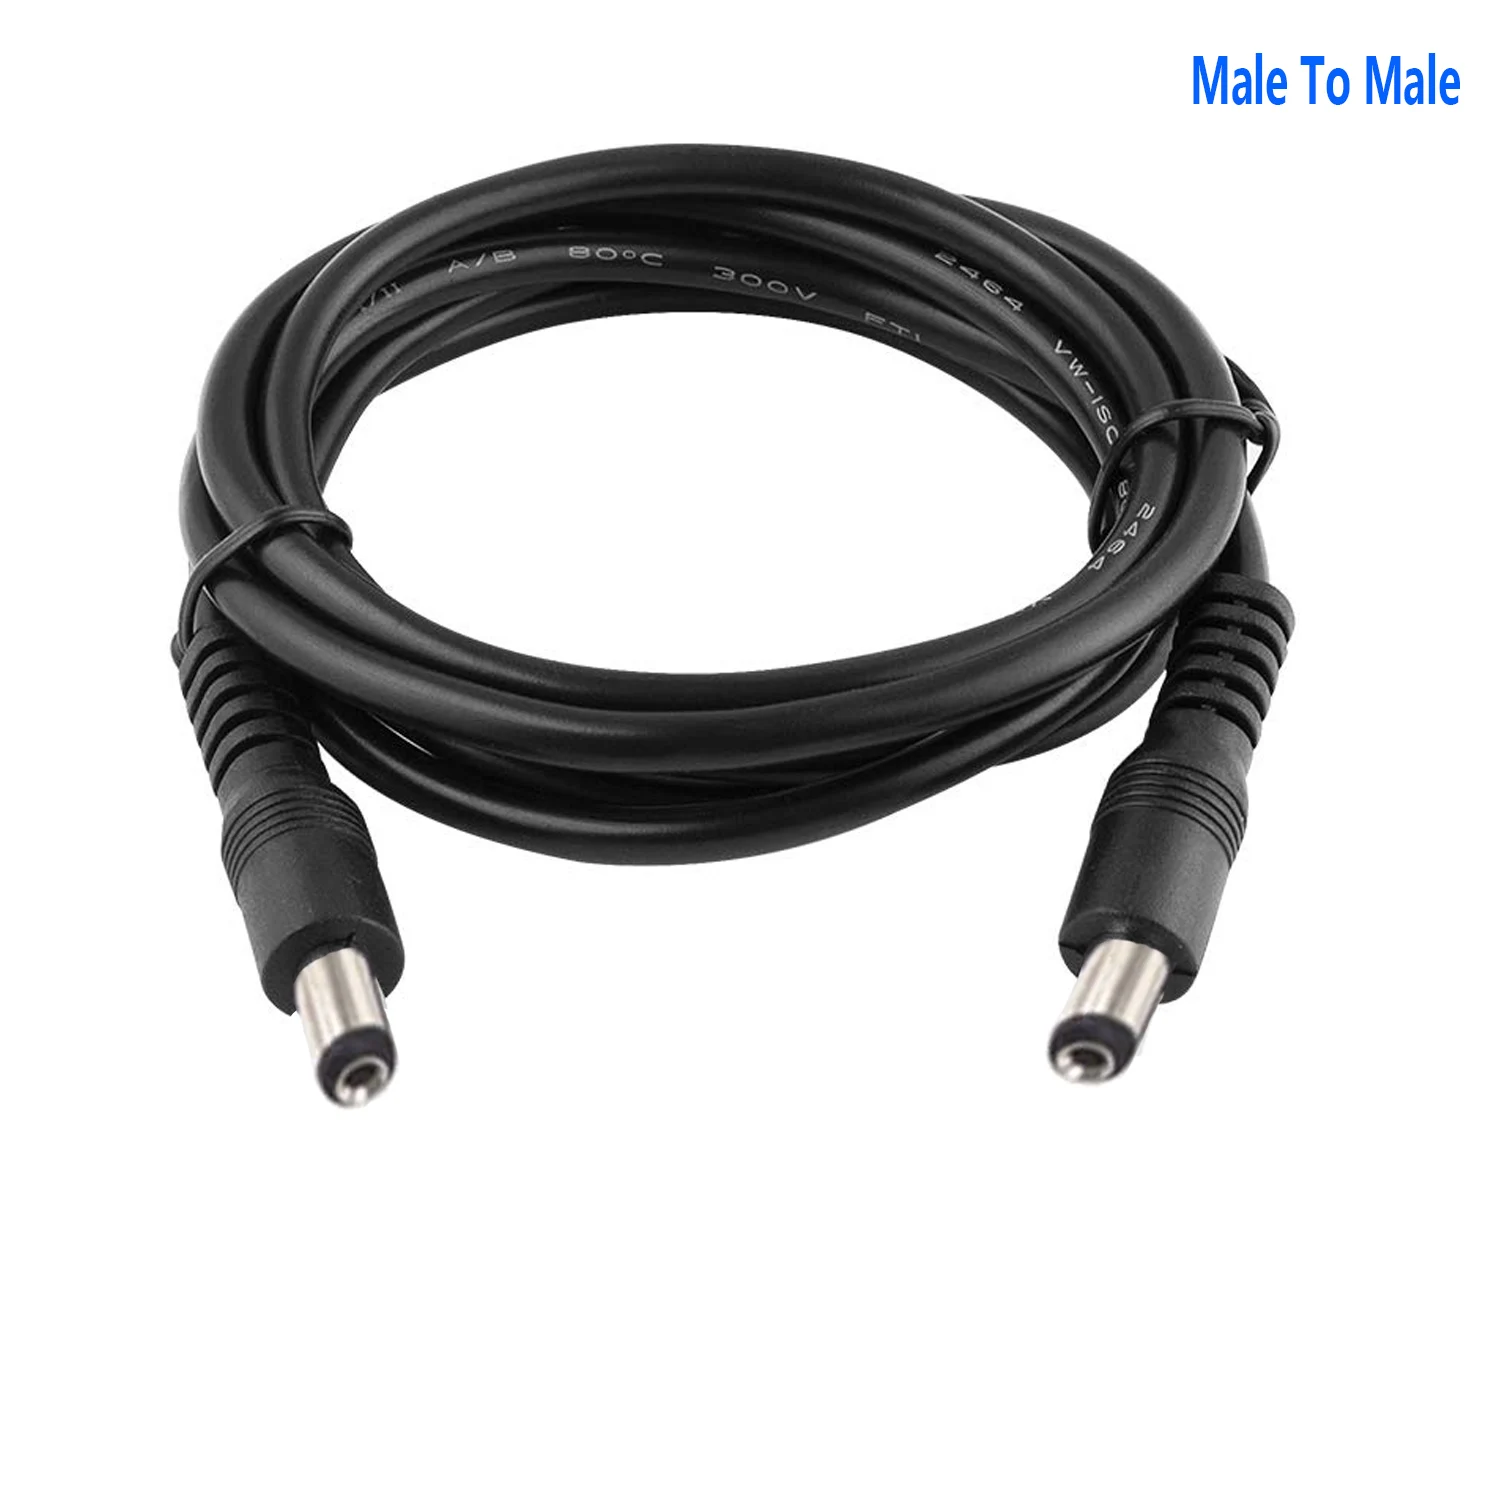 DC Extension Cable Male To Male Power Connector 5.5mm x 2.1mm Plug Adapter 2M 3M 5M 10M 15M Long For LED Power CCTV Camera DVR